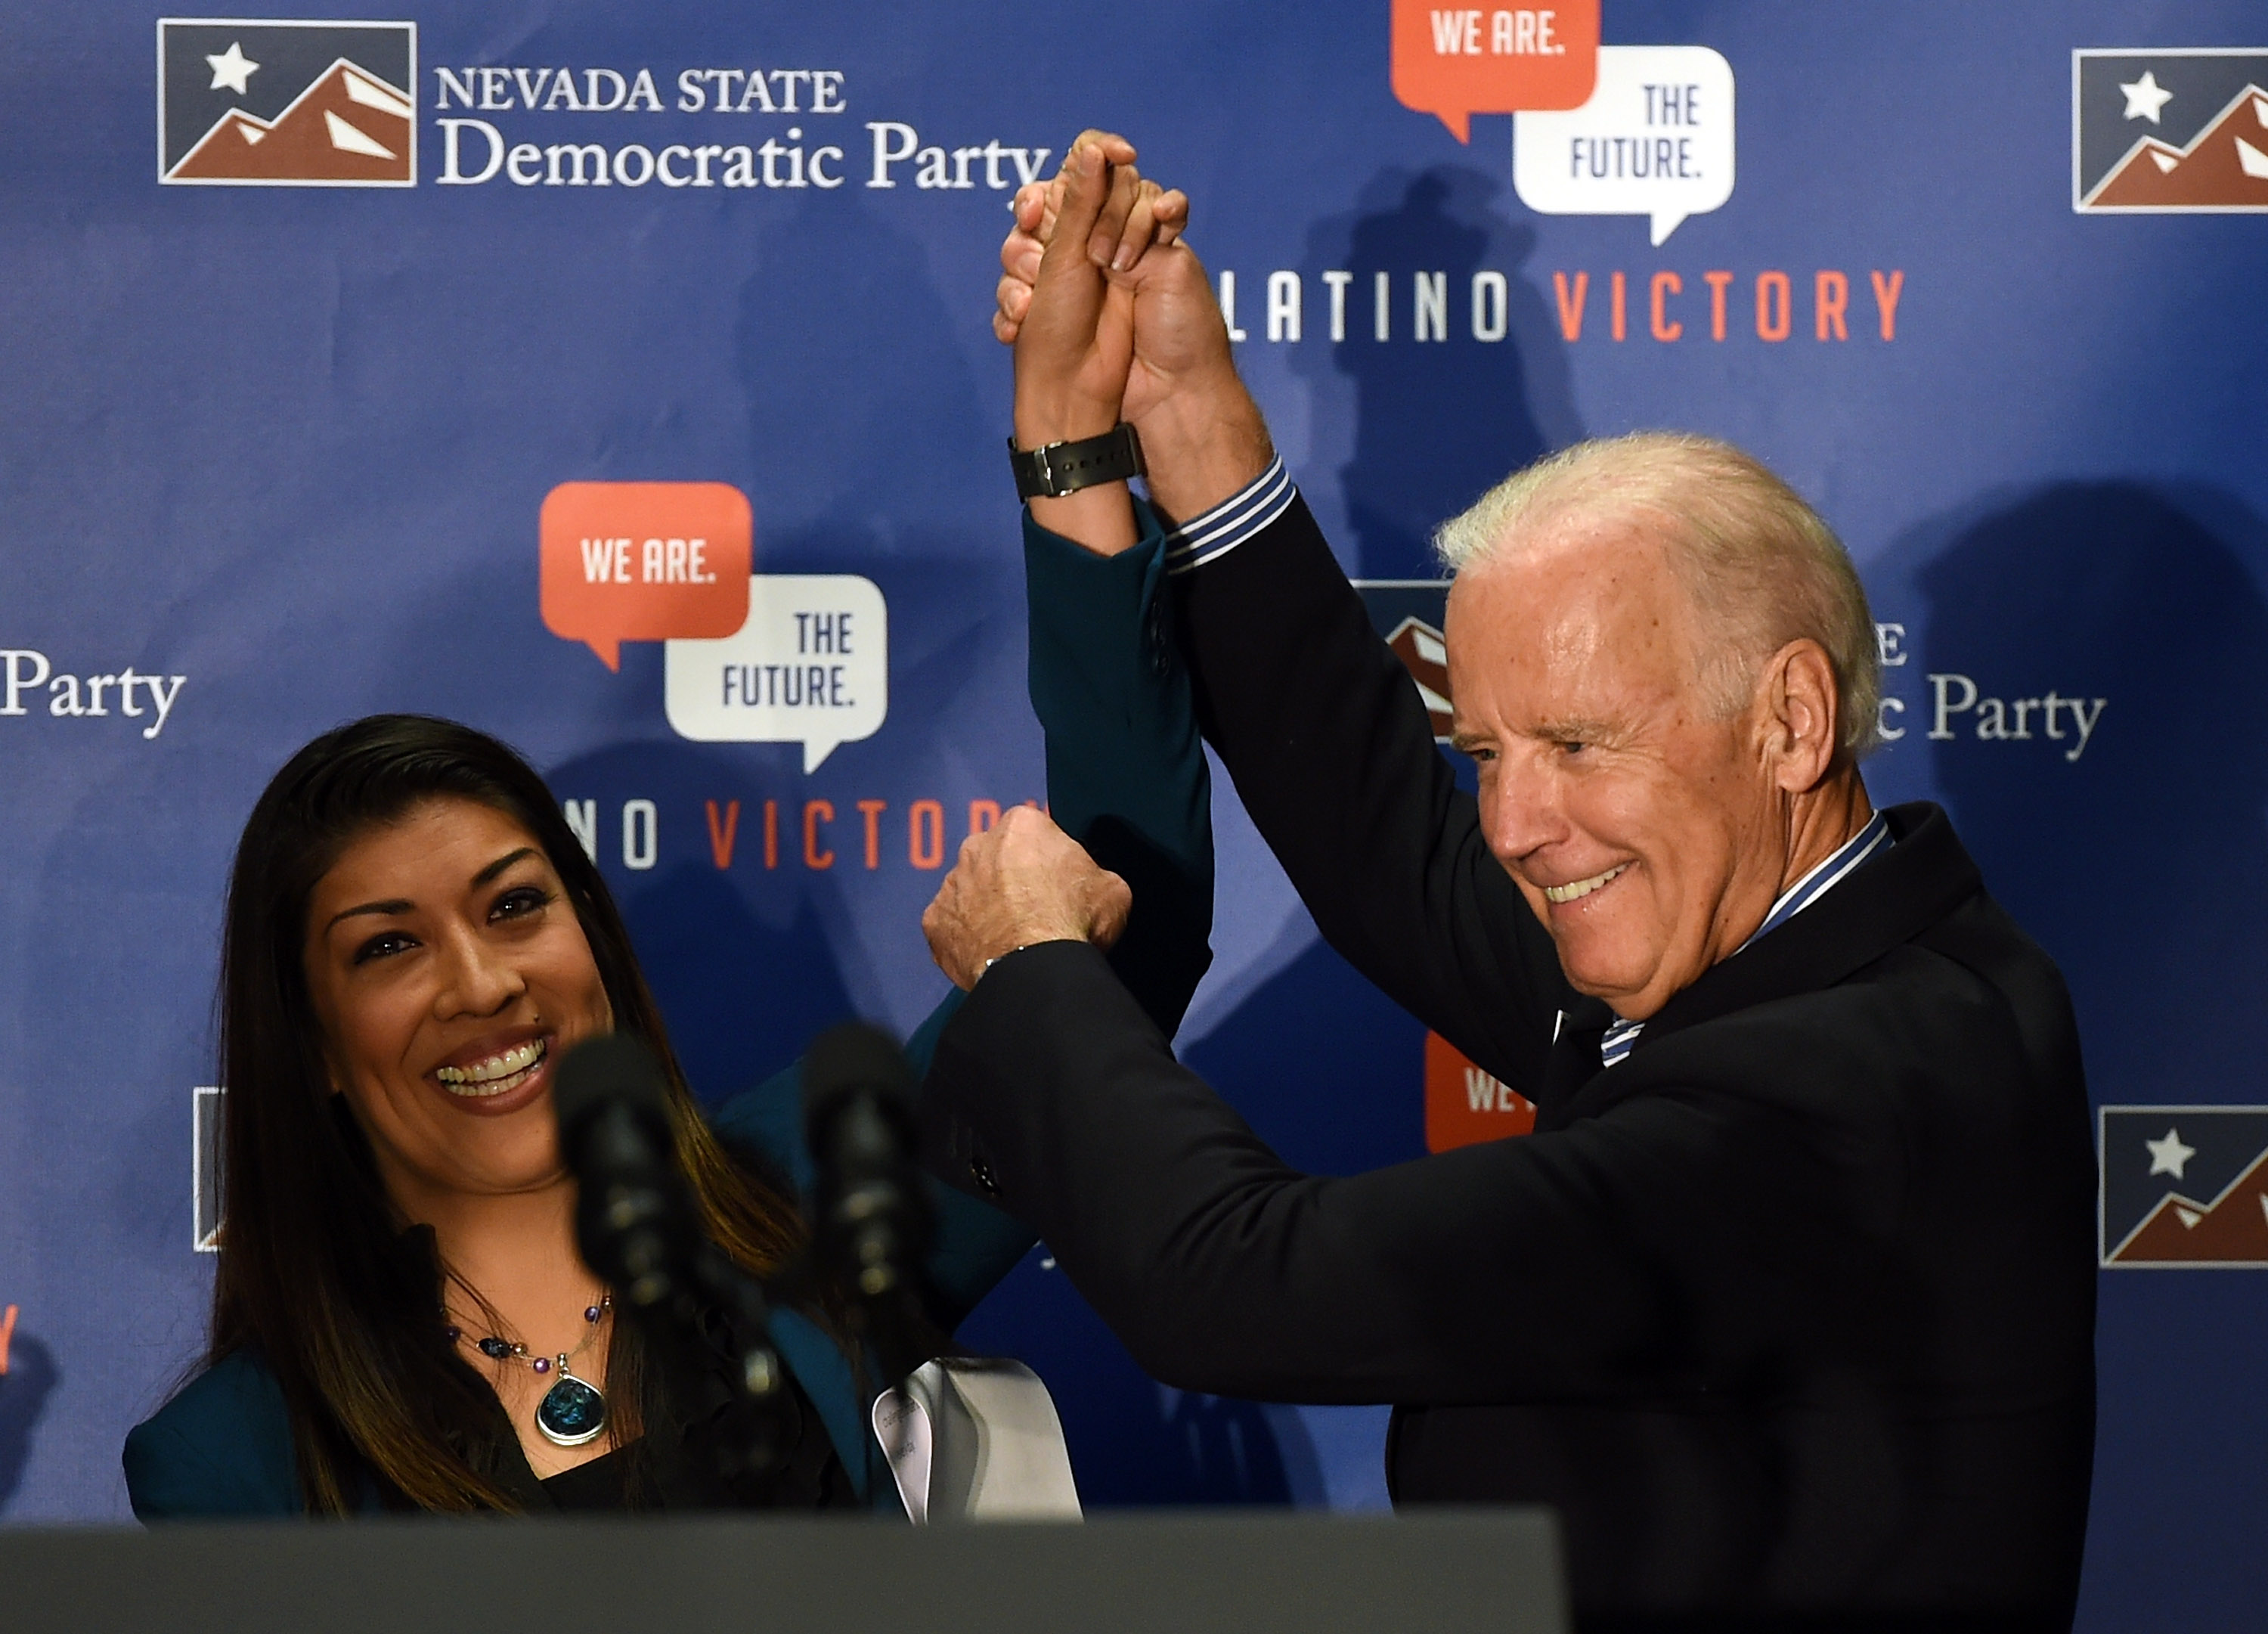 Democratic candidate for lieutenant governor and current Nevada Assemblywoman Lucy Flores (L) introduces U.S. Vice President Joe Biden at a get-out-the-vote rally at a union hall on November 1, 2014 in Las Vegas, Nevada. (Photo by Ethan Miller/Getty Images)